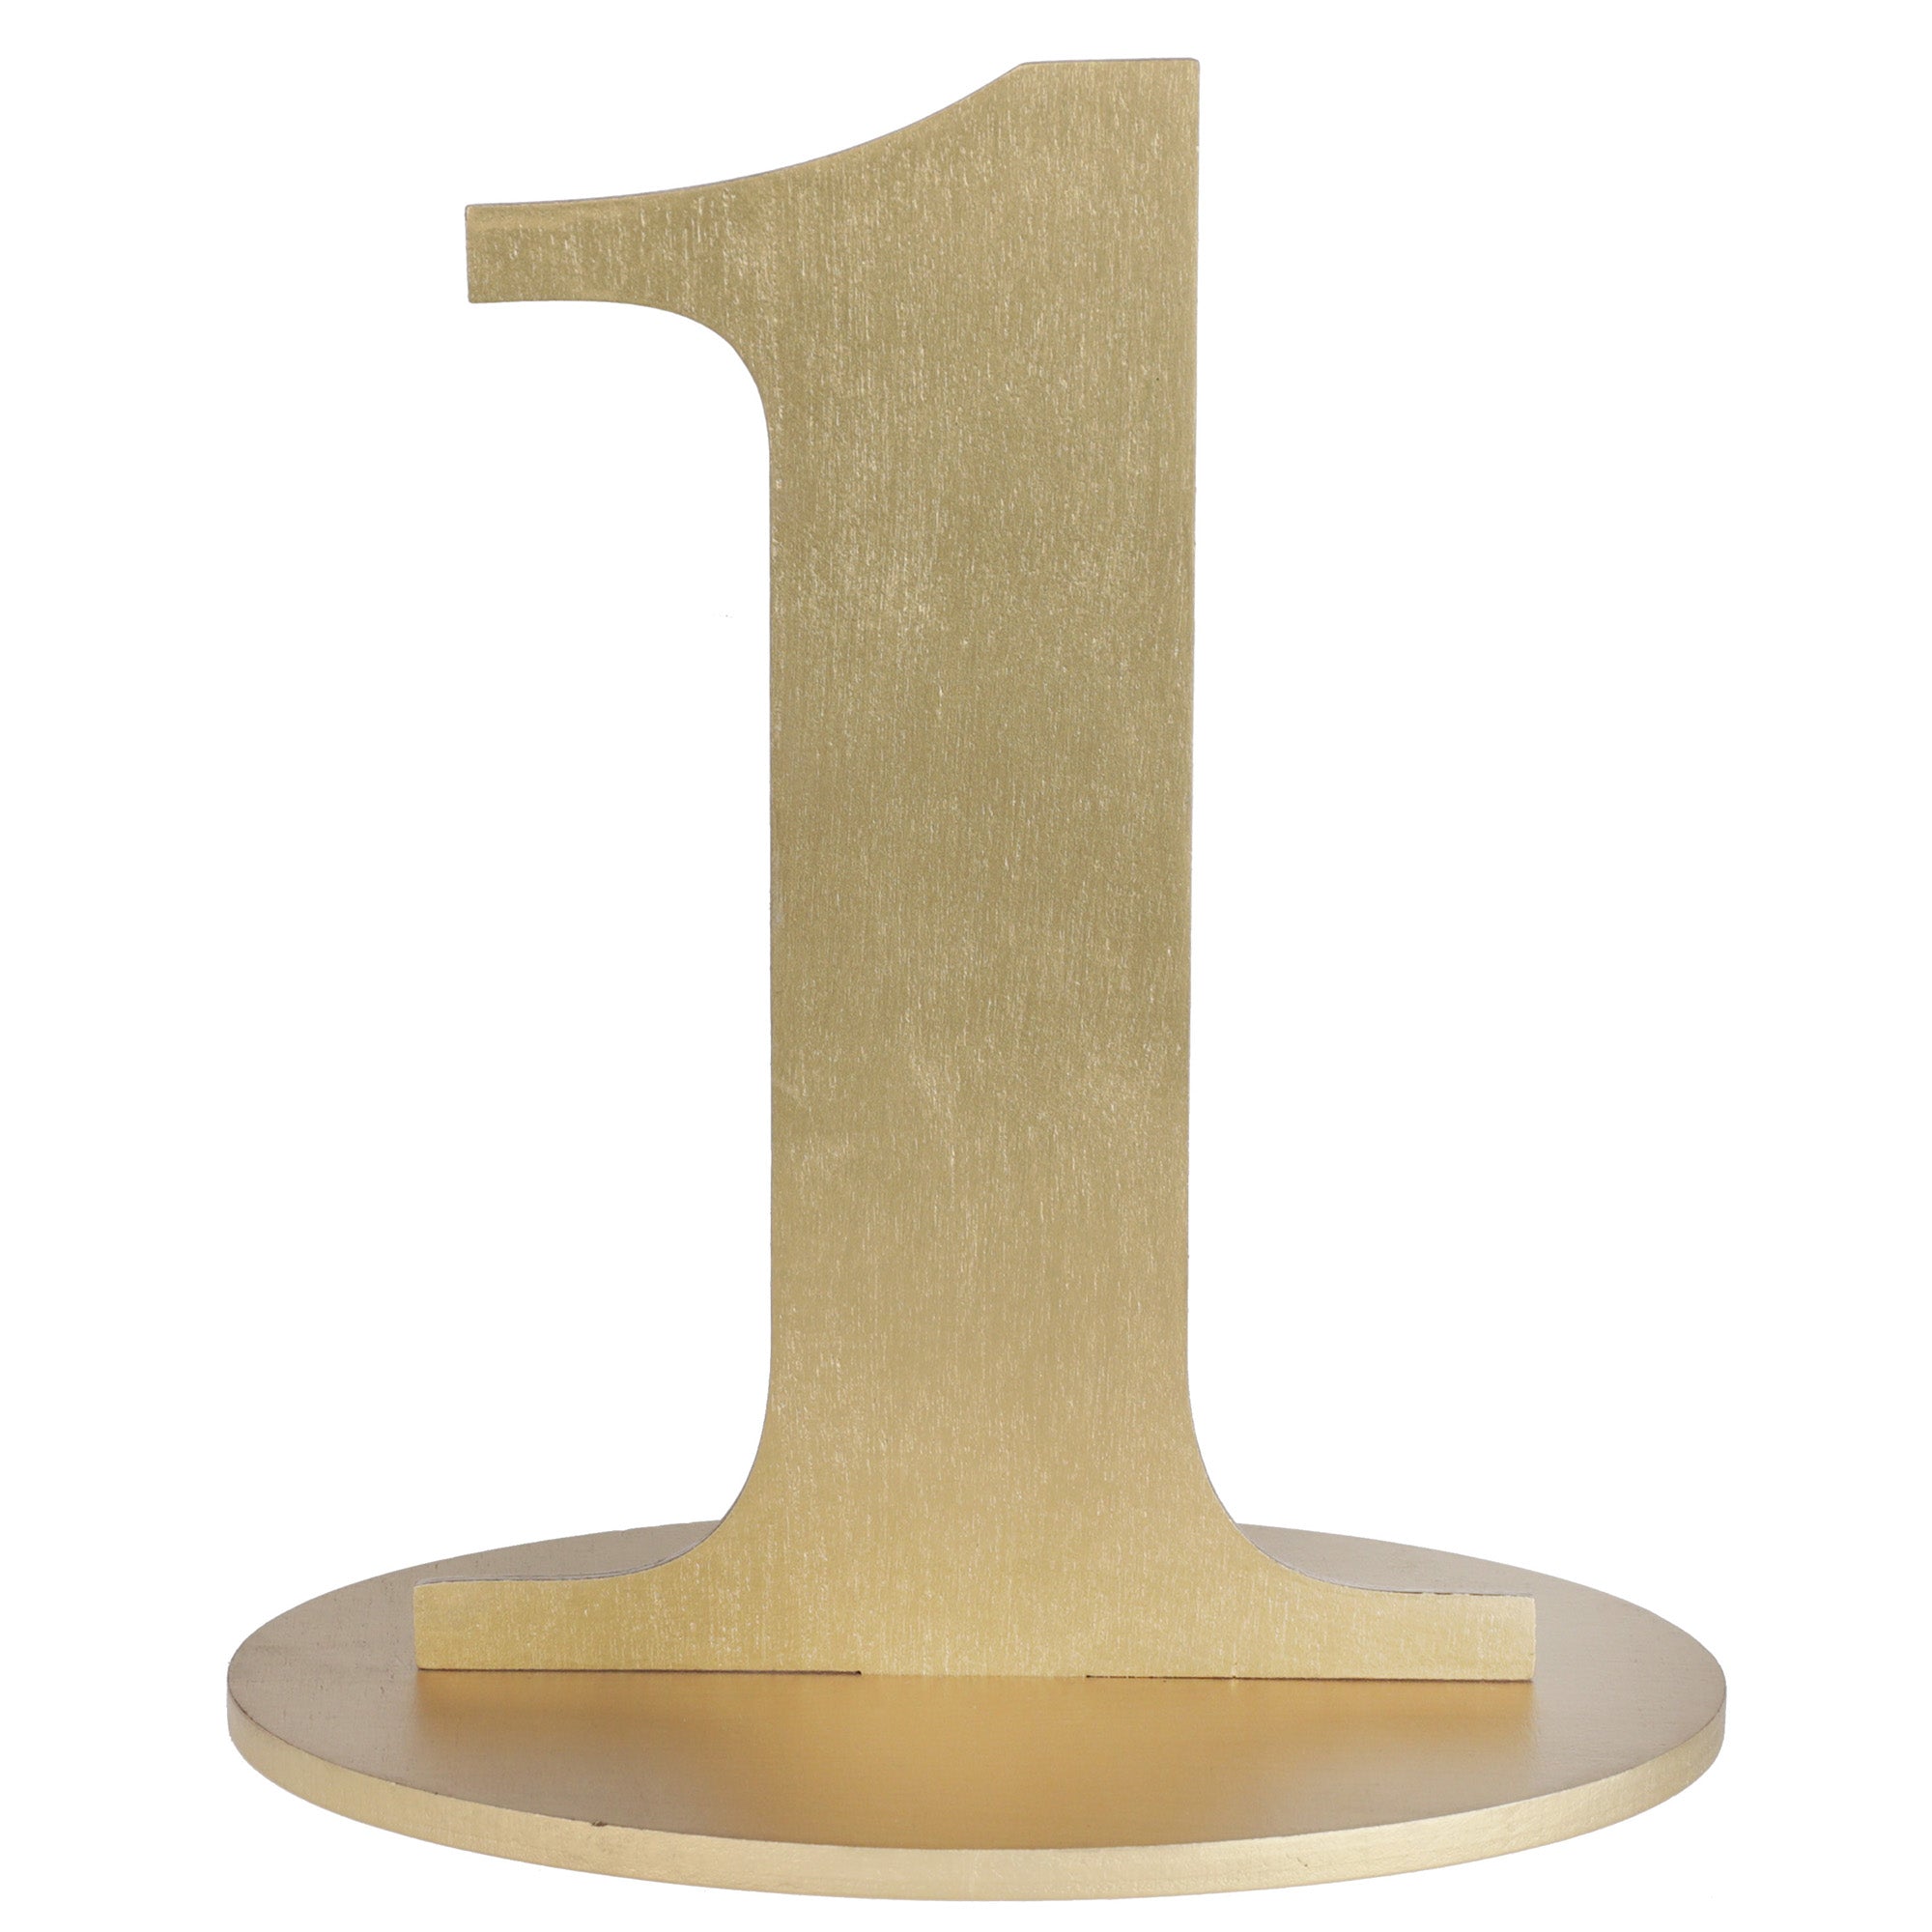 Number 1 Name Holder Gold Metallic 5.5x3.5x6.7in